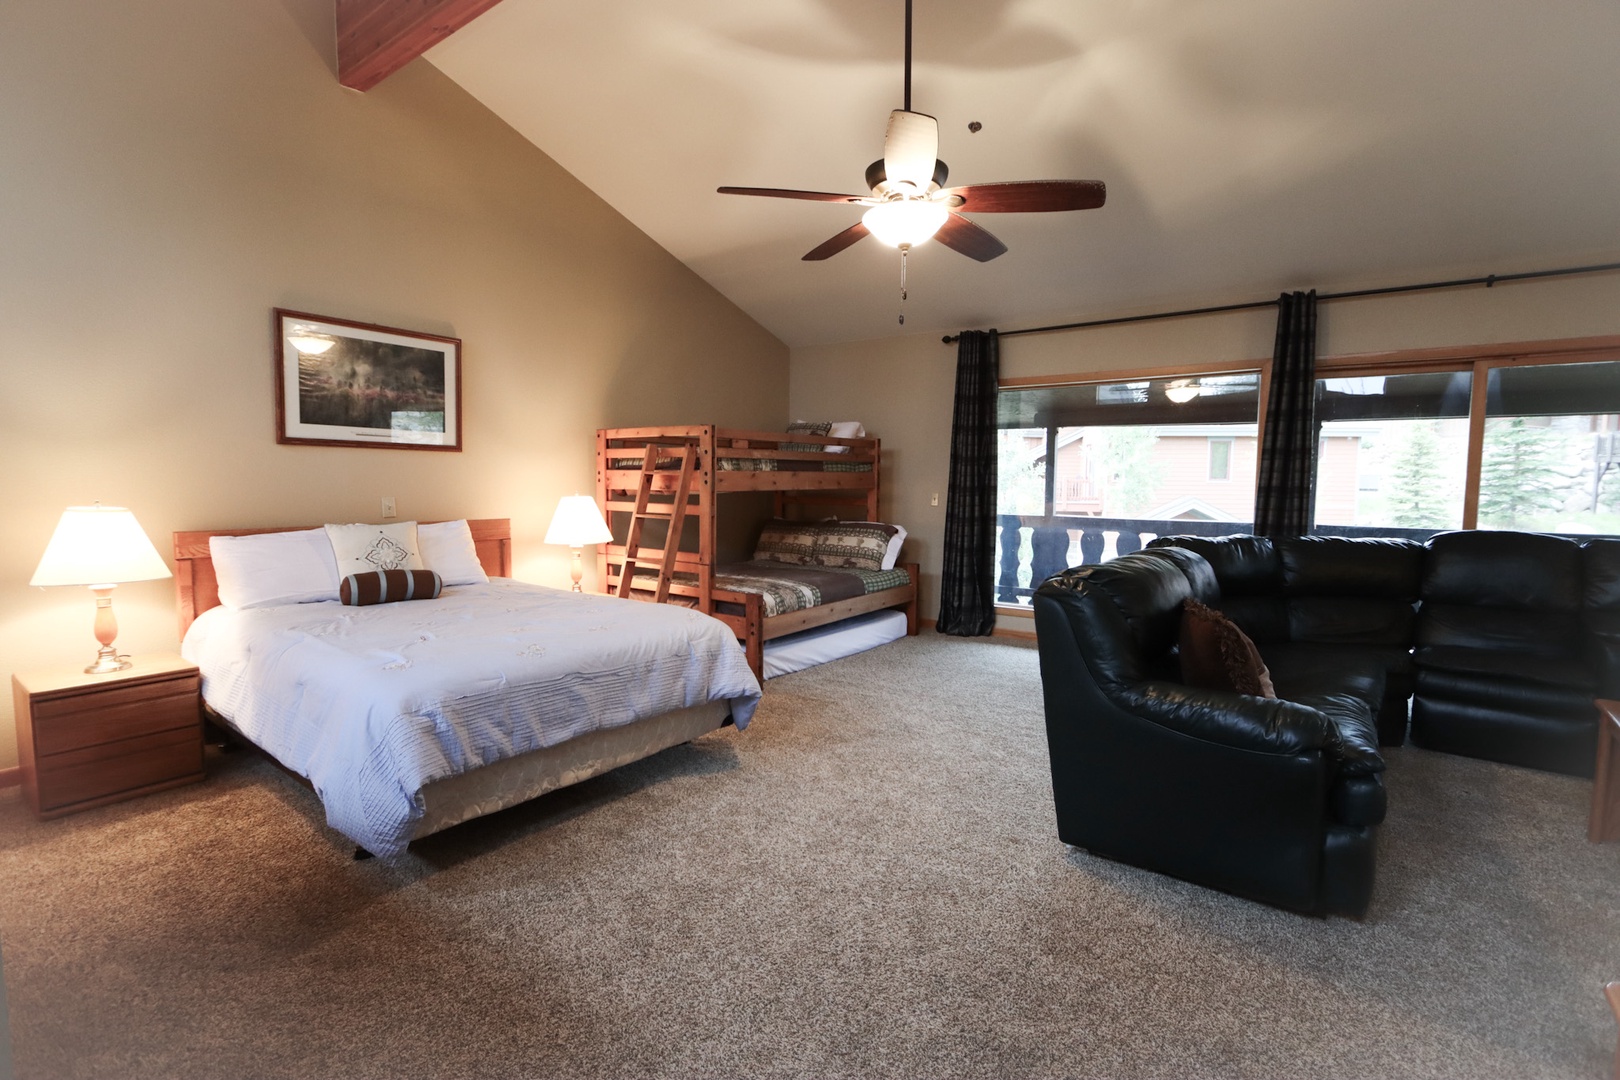 Find an additional queen bed & twin-over-full bunkbed in the spacious loft